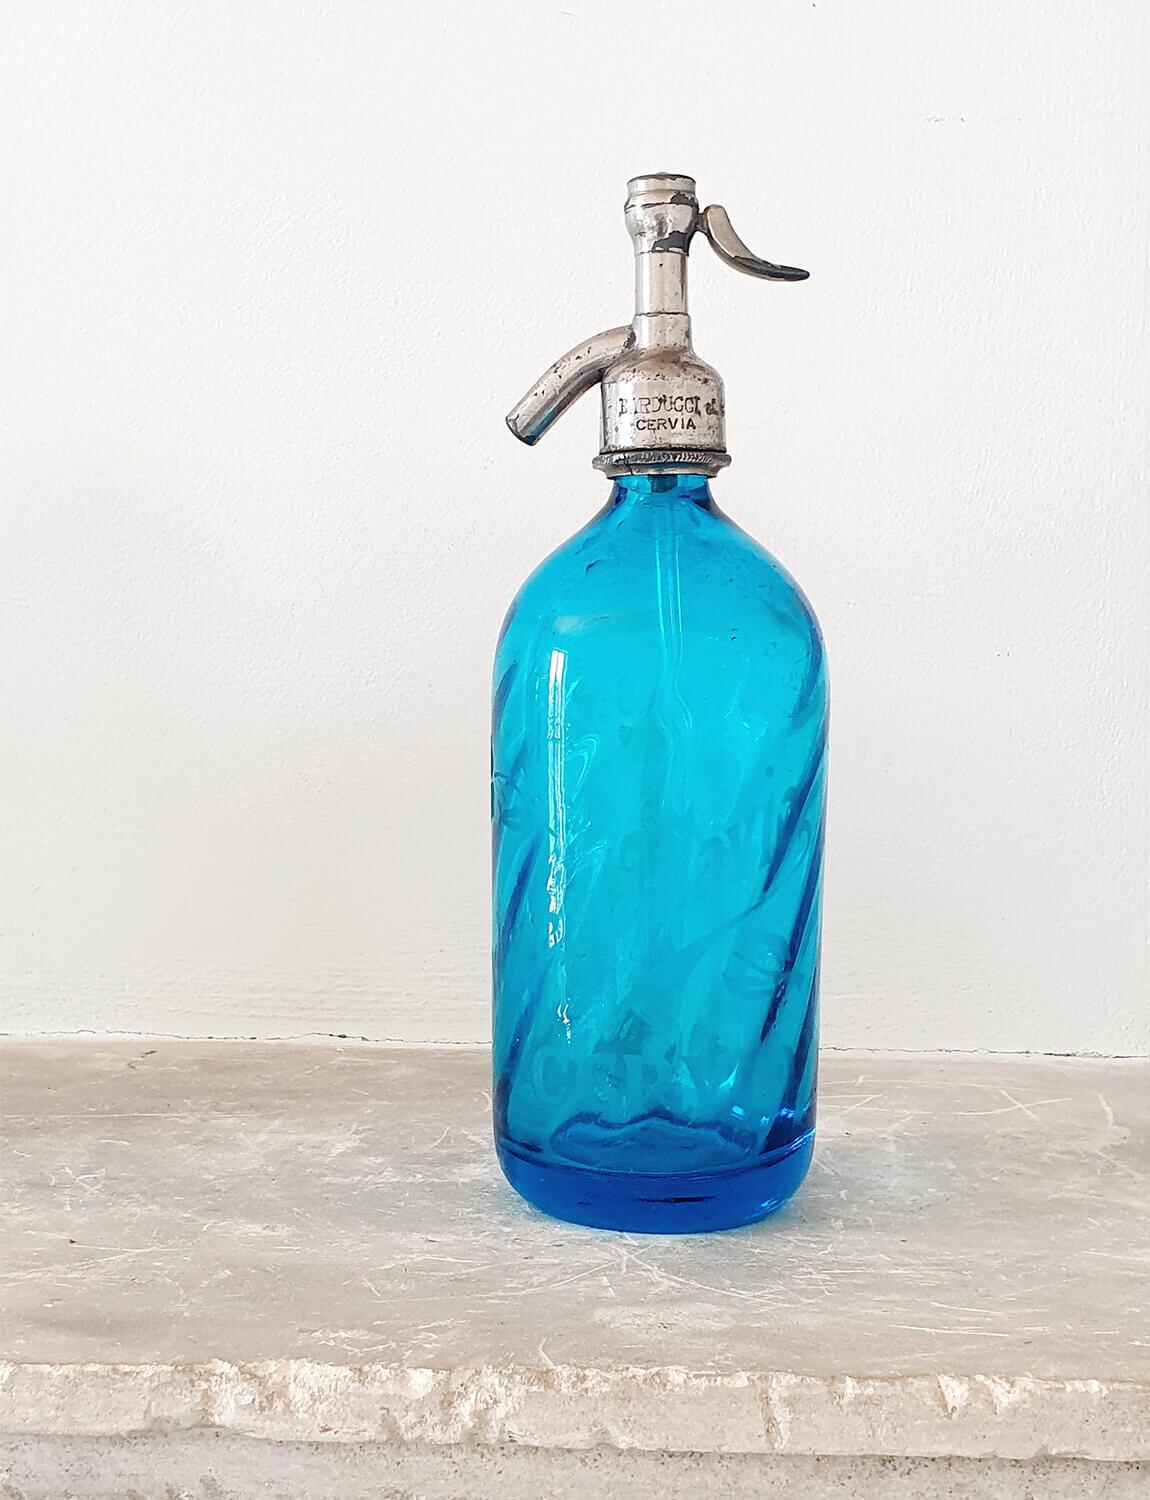 Blue Italian glass soda bottle originally used in an Italian bar in Cervia. In good condition considering its age. The words Ottavia Cerva are written in frosted glass on the bottle - the name and place of the bar where it was originally used.